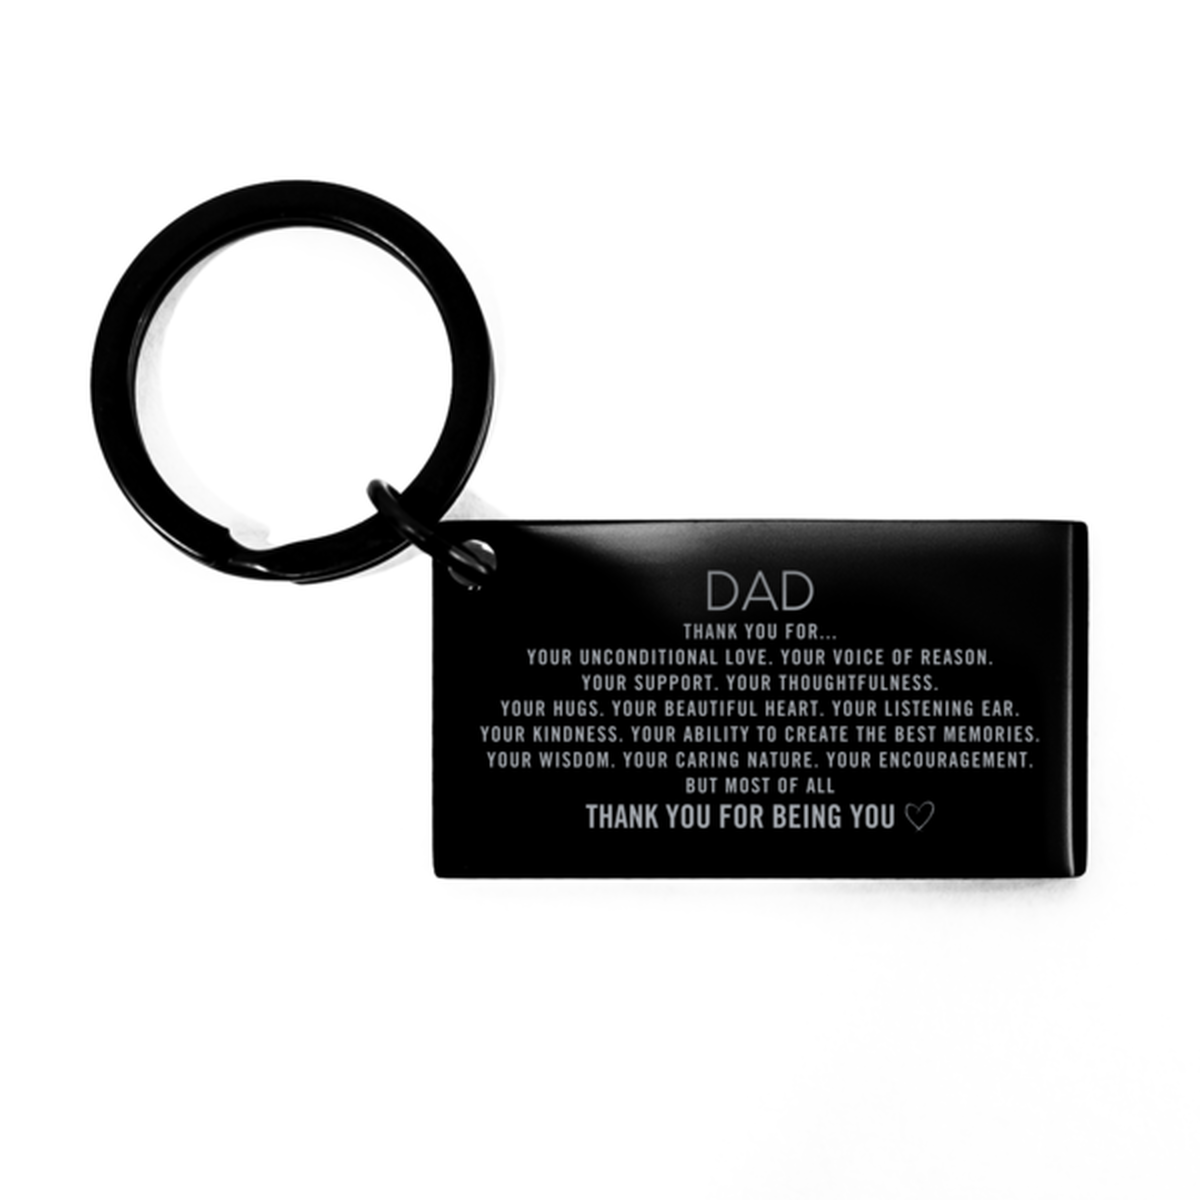 Dad Keychain Custom, Engraved Gifts For Dad Christmas Graduation Birthday Gifts for Men Women Dad Thank you for Your unconditional love